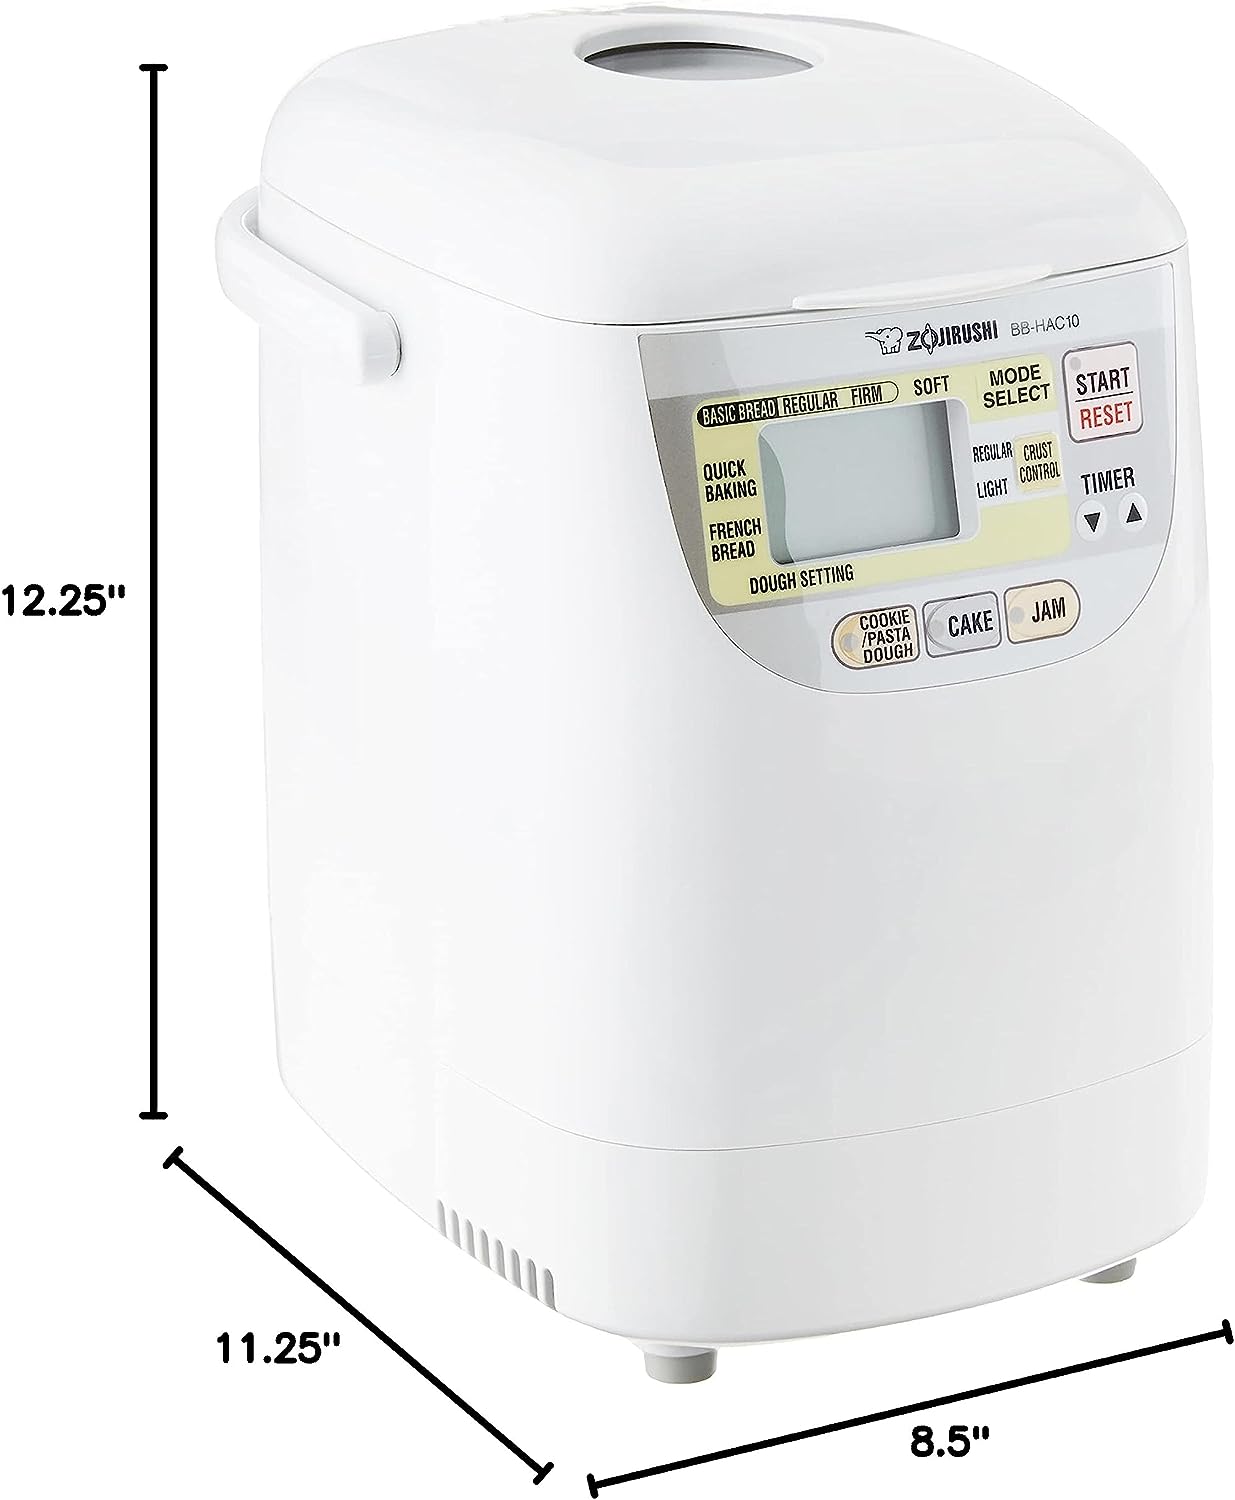 Zojirushi BB-HAC10 Home Bakery 1-Pound-Loaf Programmable Mini Breadmaker Review